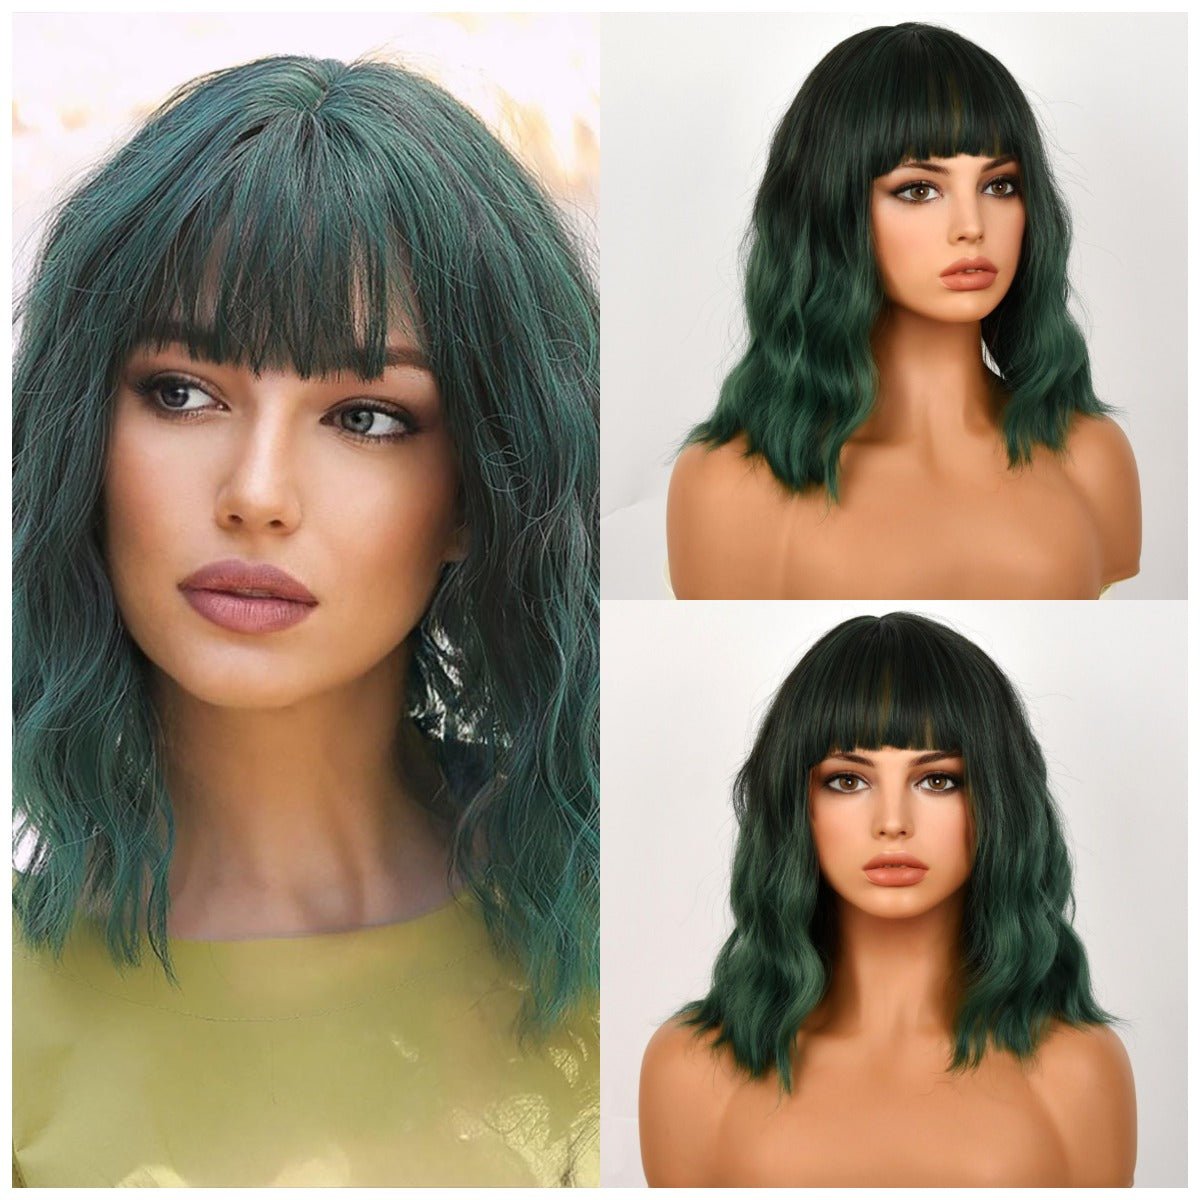 16-inch | Green Loose Wave with Hair Bangs | SM170-1 - TapLike